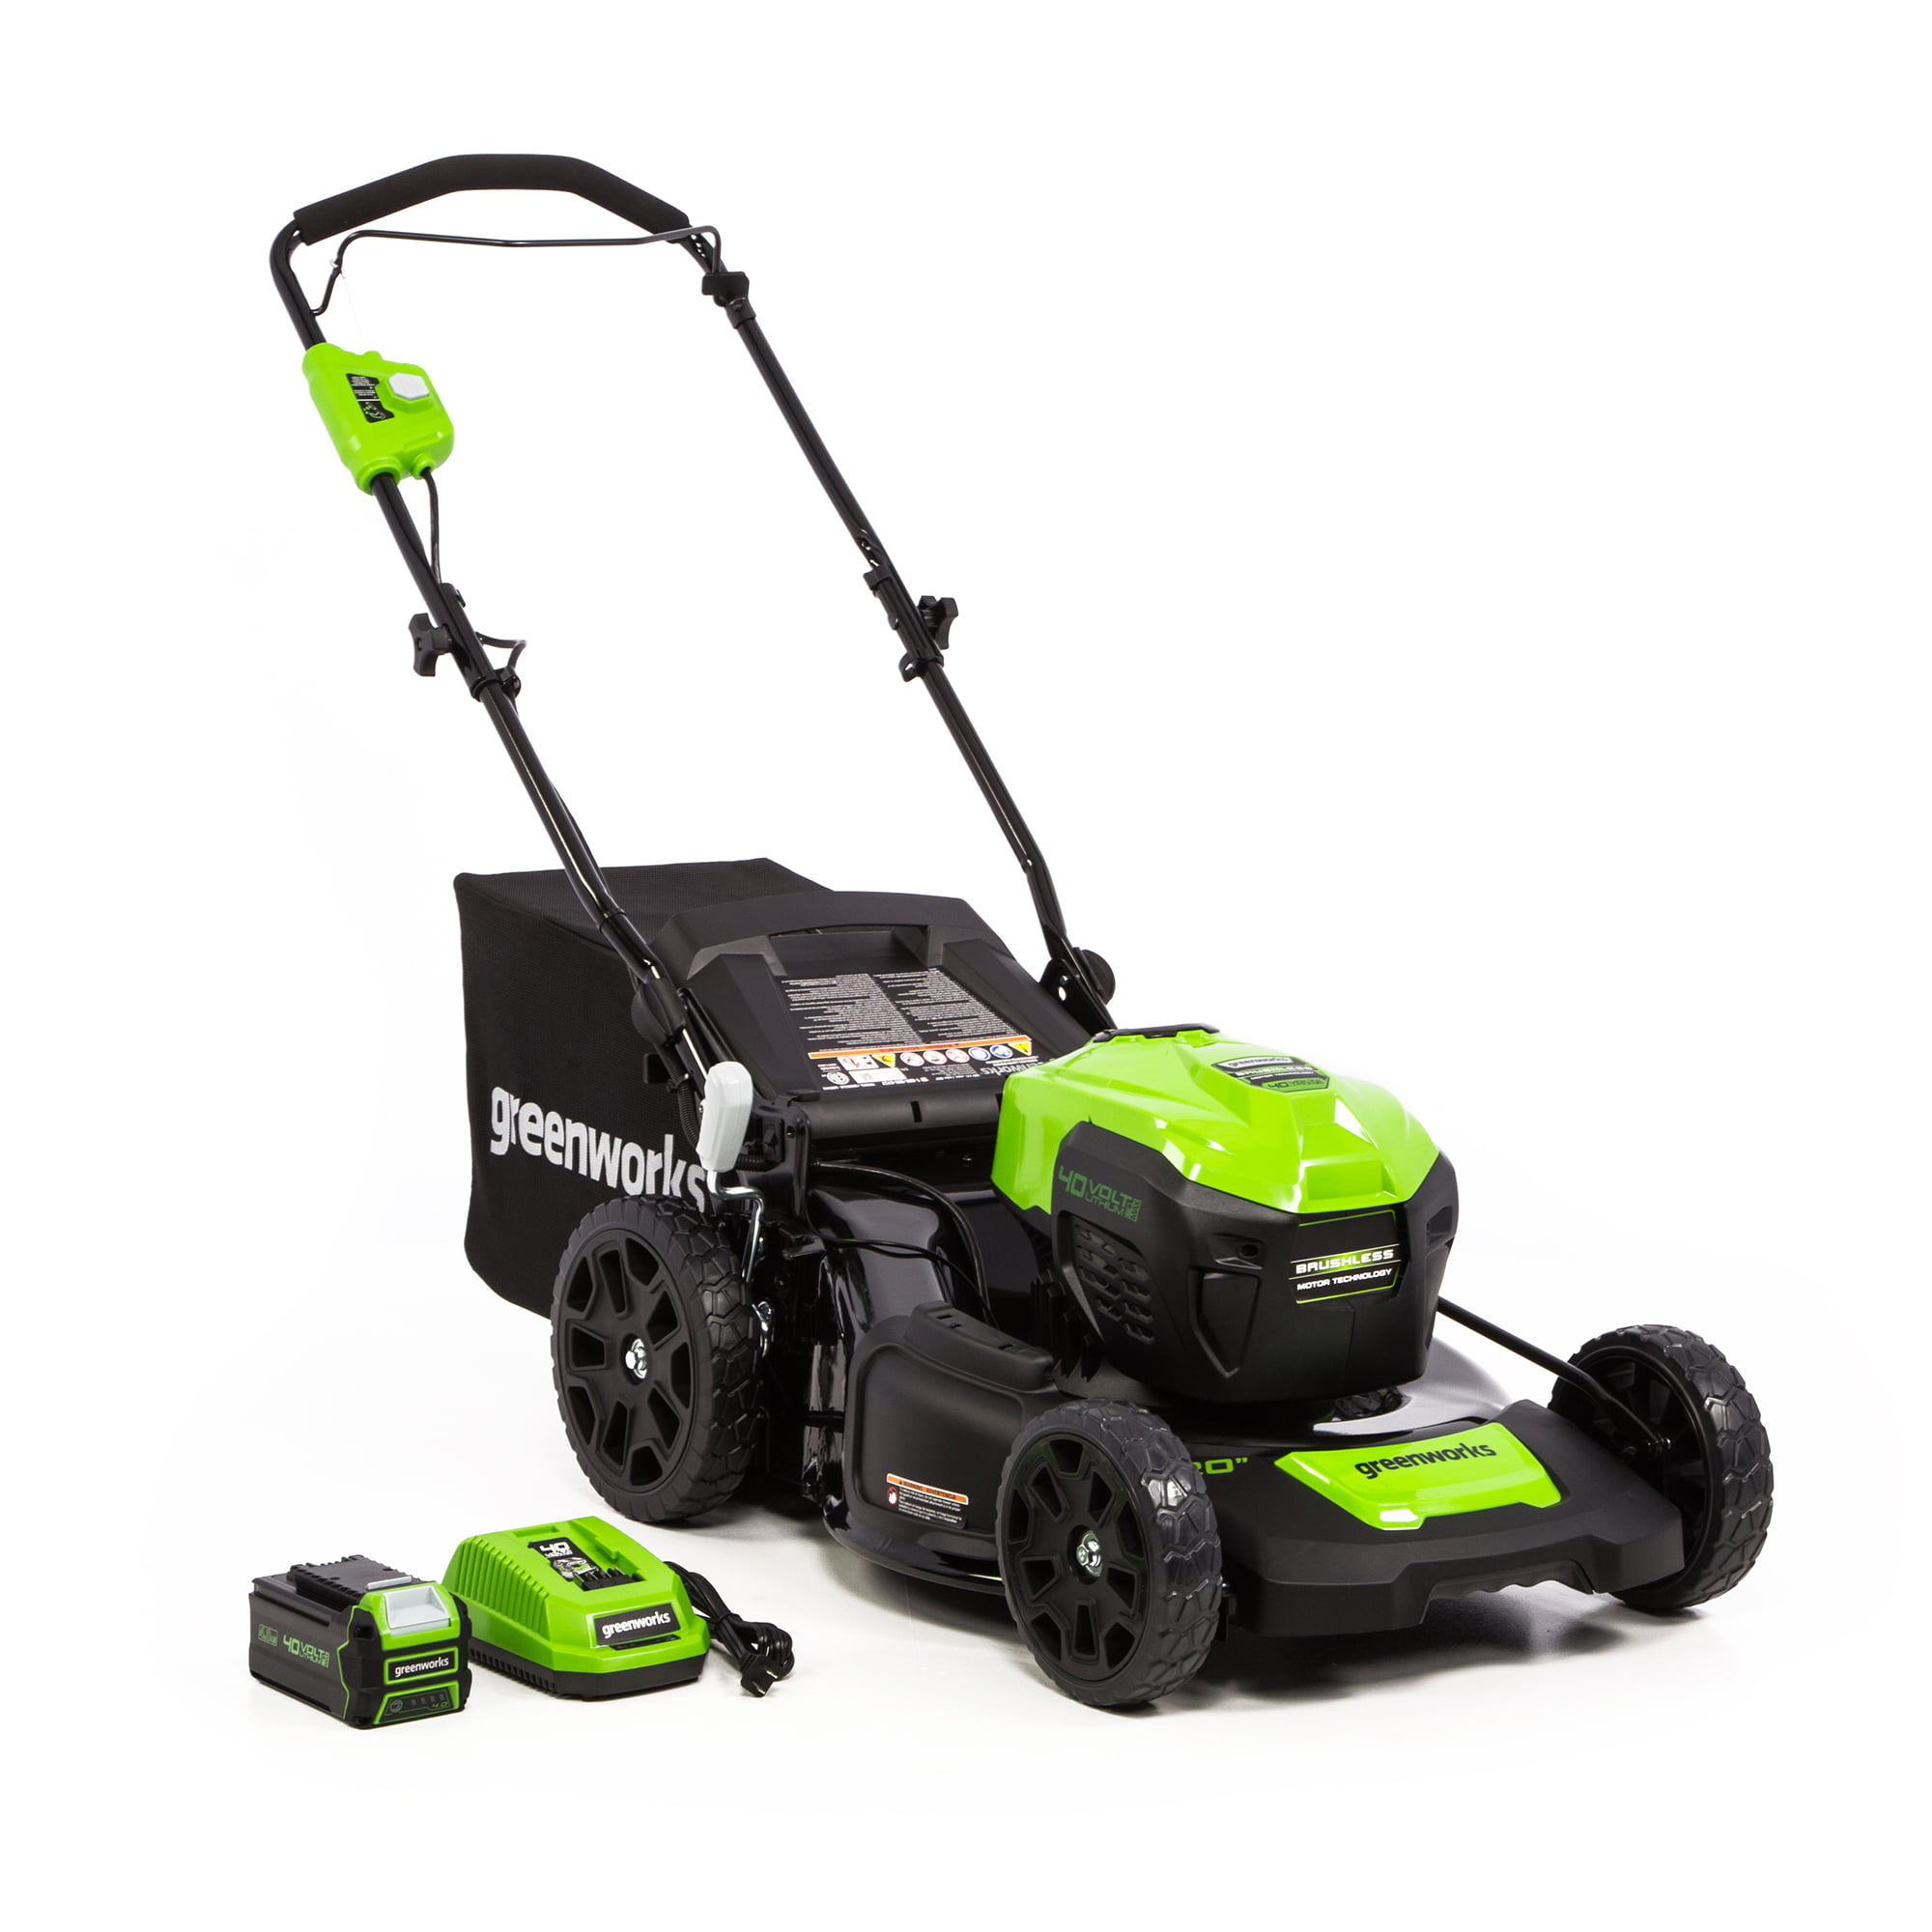 Who should buy the greenworks lawn mowers?